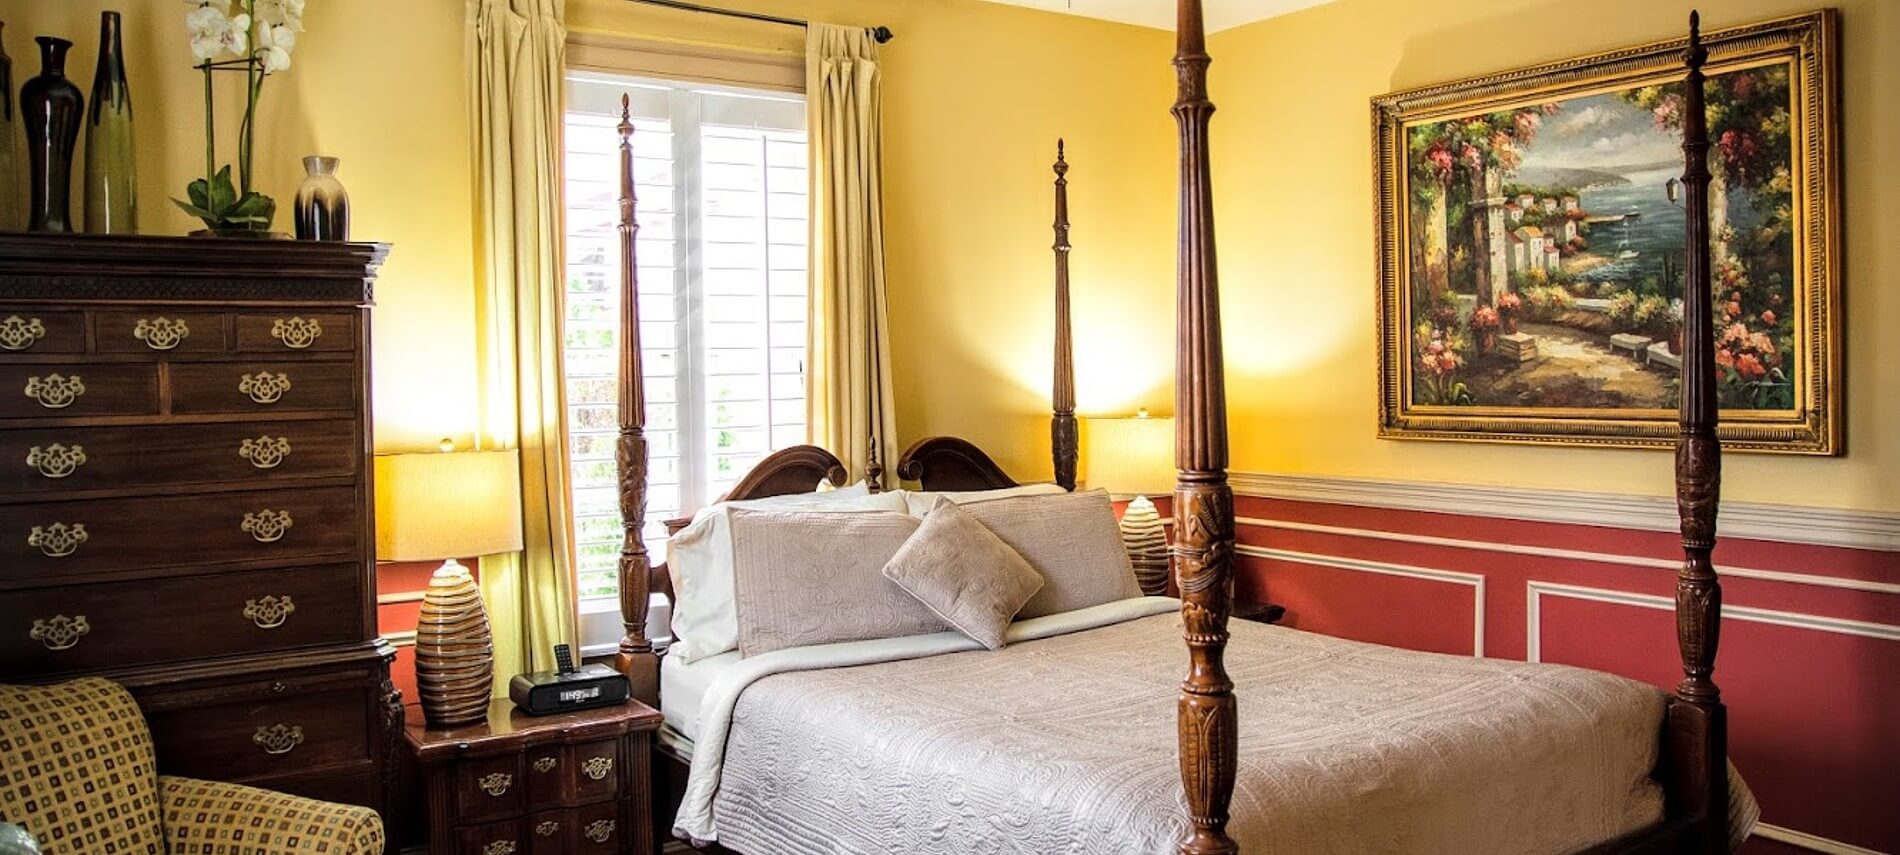 Elegant guest room with four poster bed in white linens, red and yellow walls and brown accent furniture